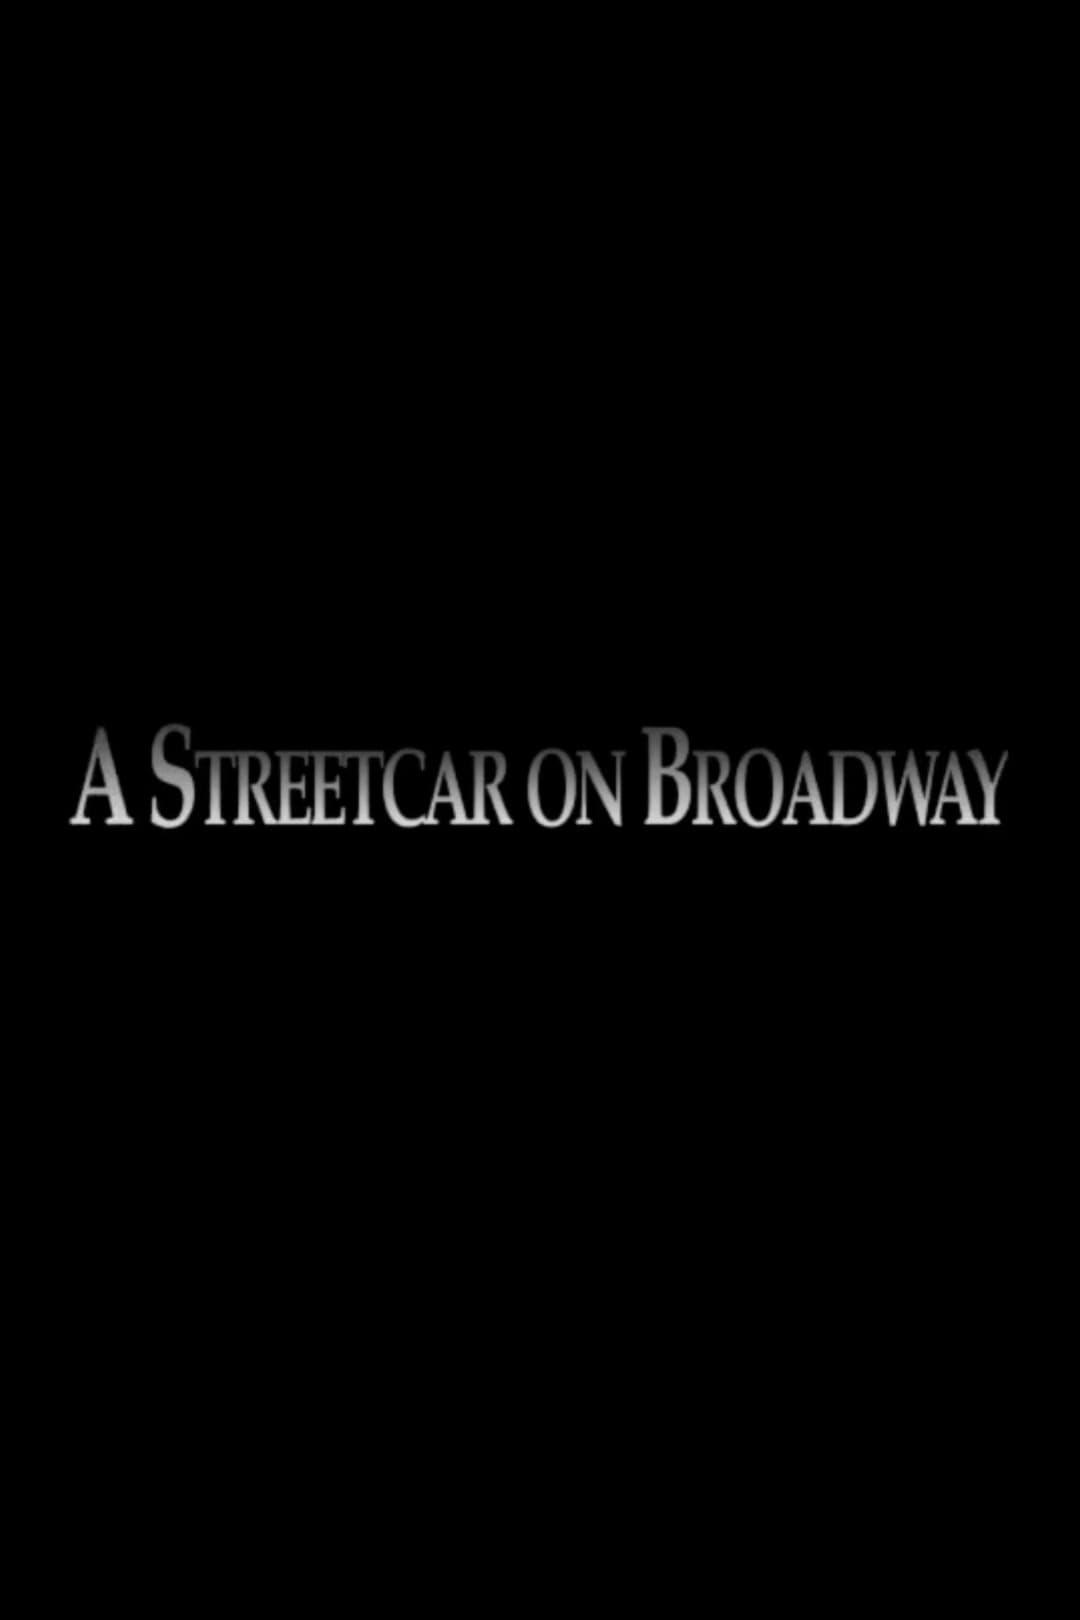 A Streetcar on Broadway poster